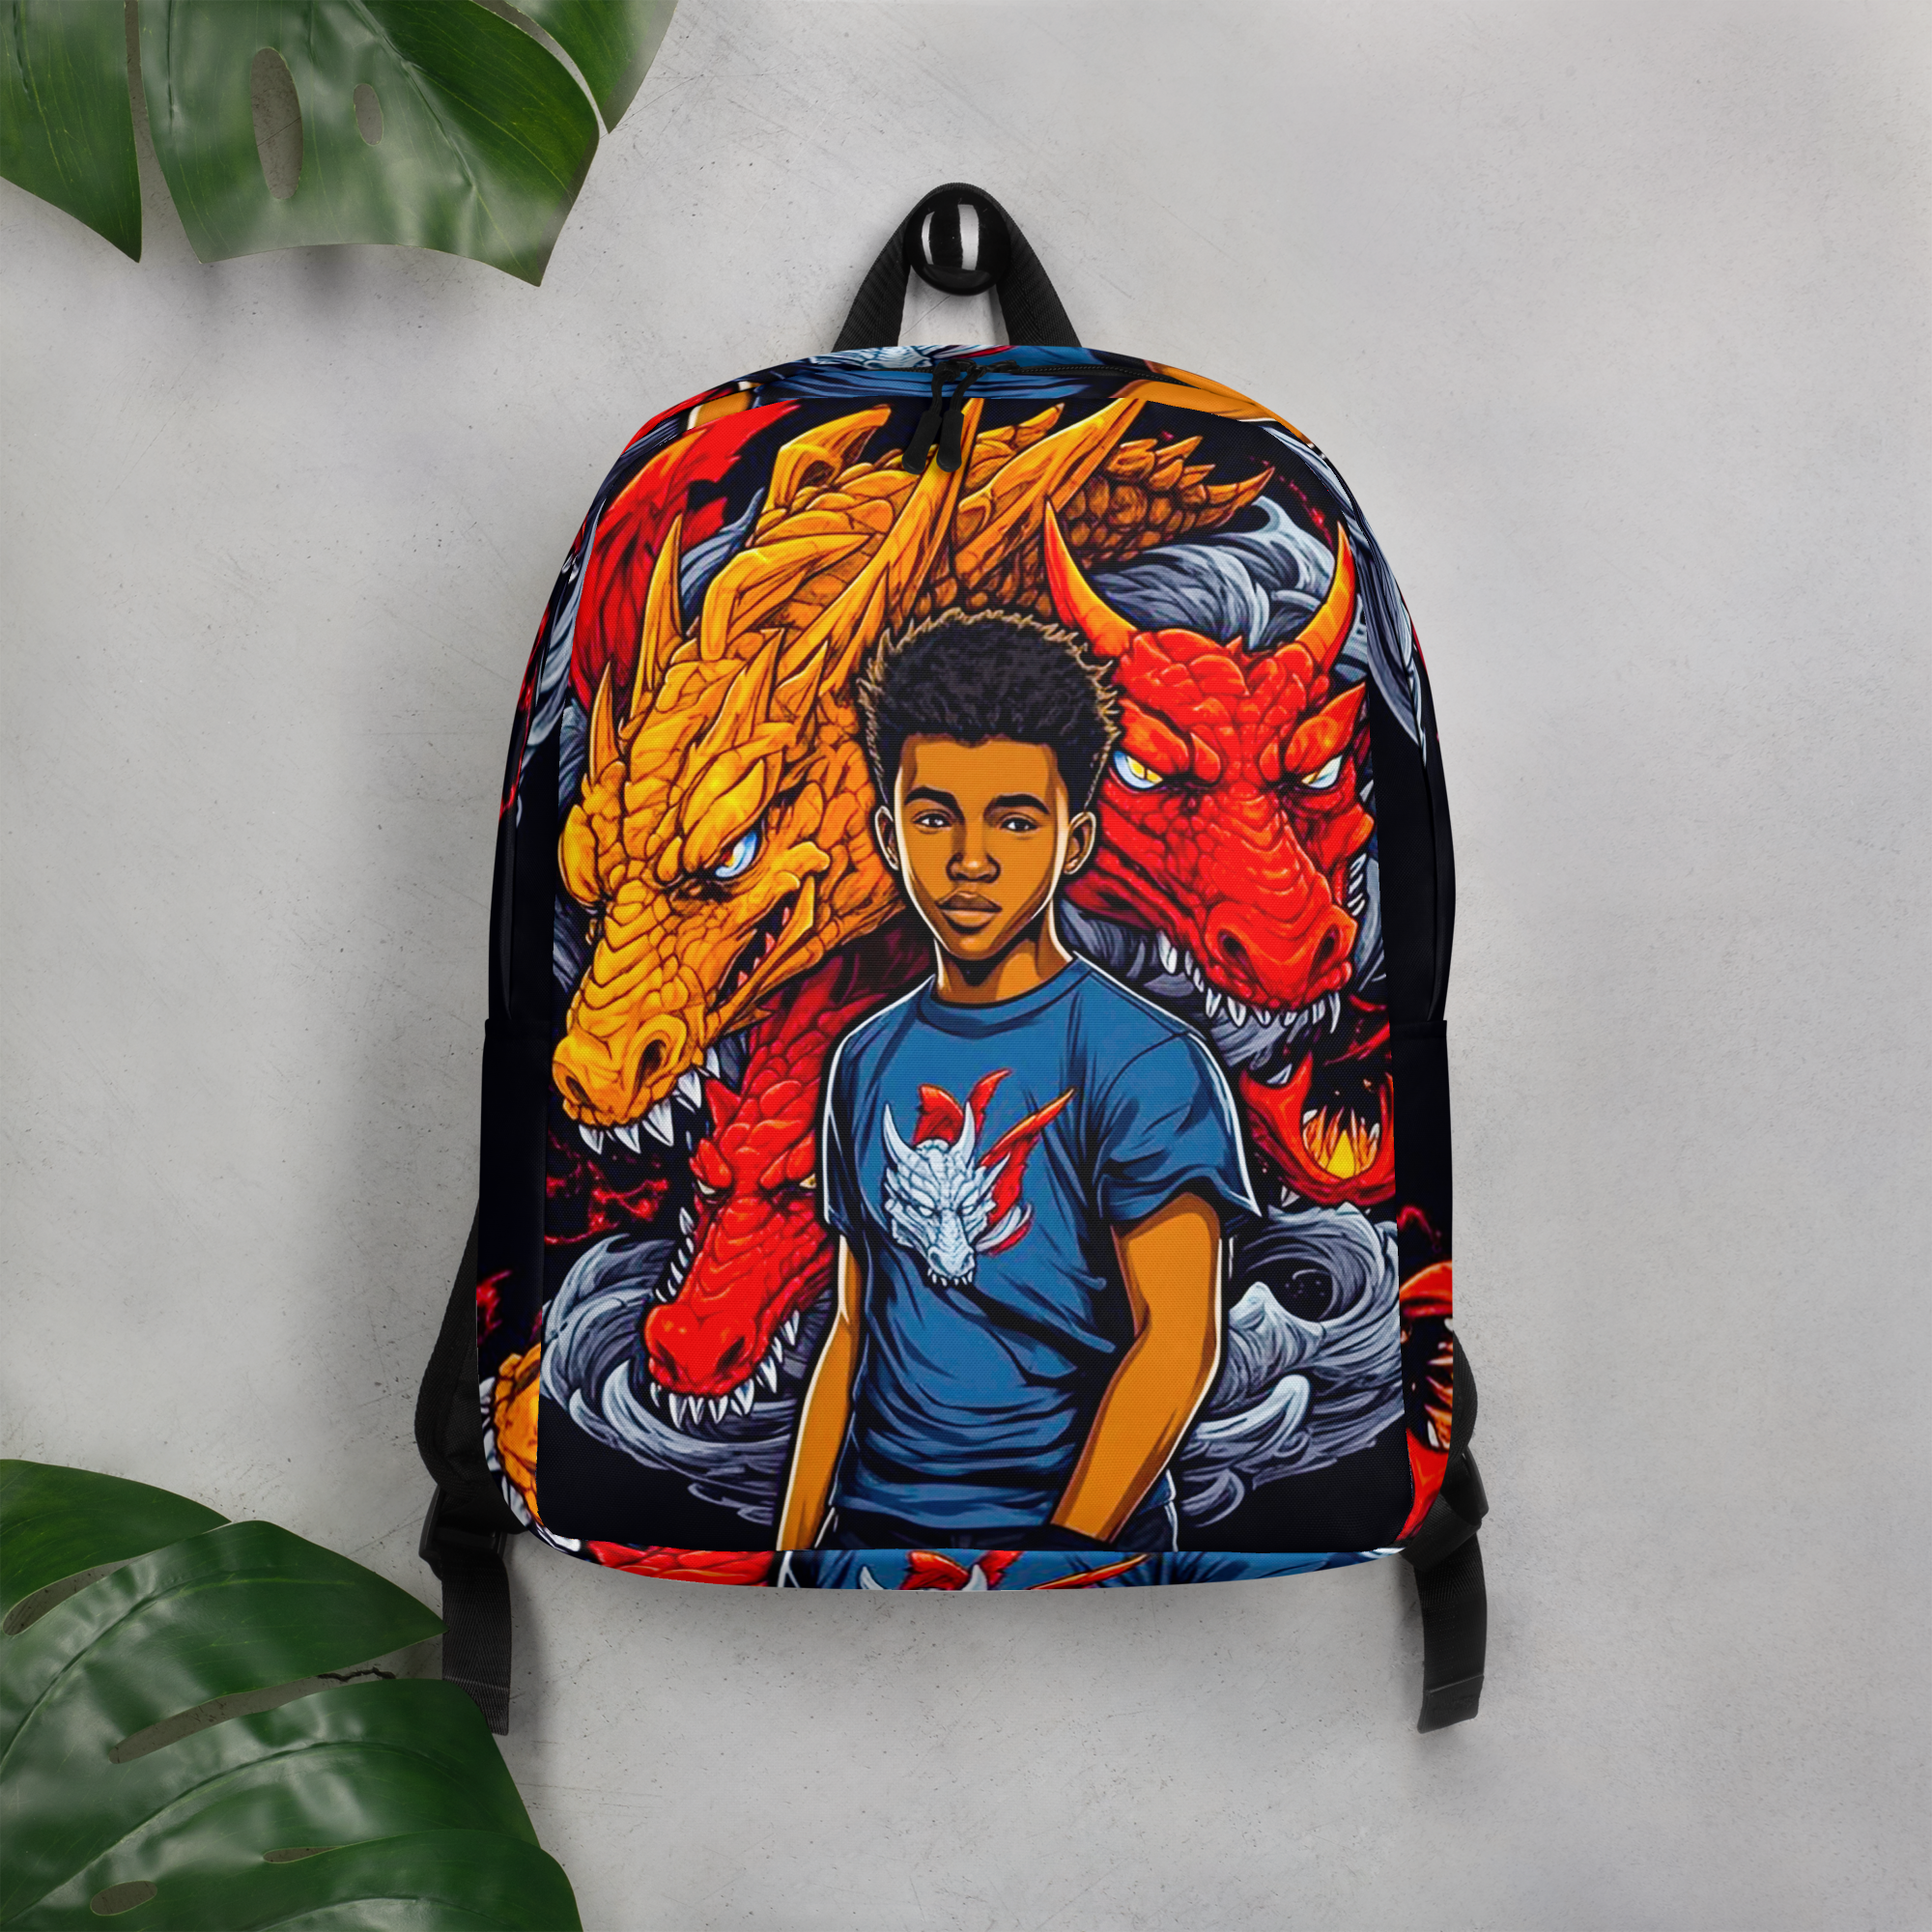 "KID DRAGON" - African American Themed Backpack with Laptop Pocket